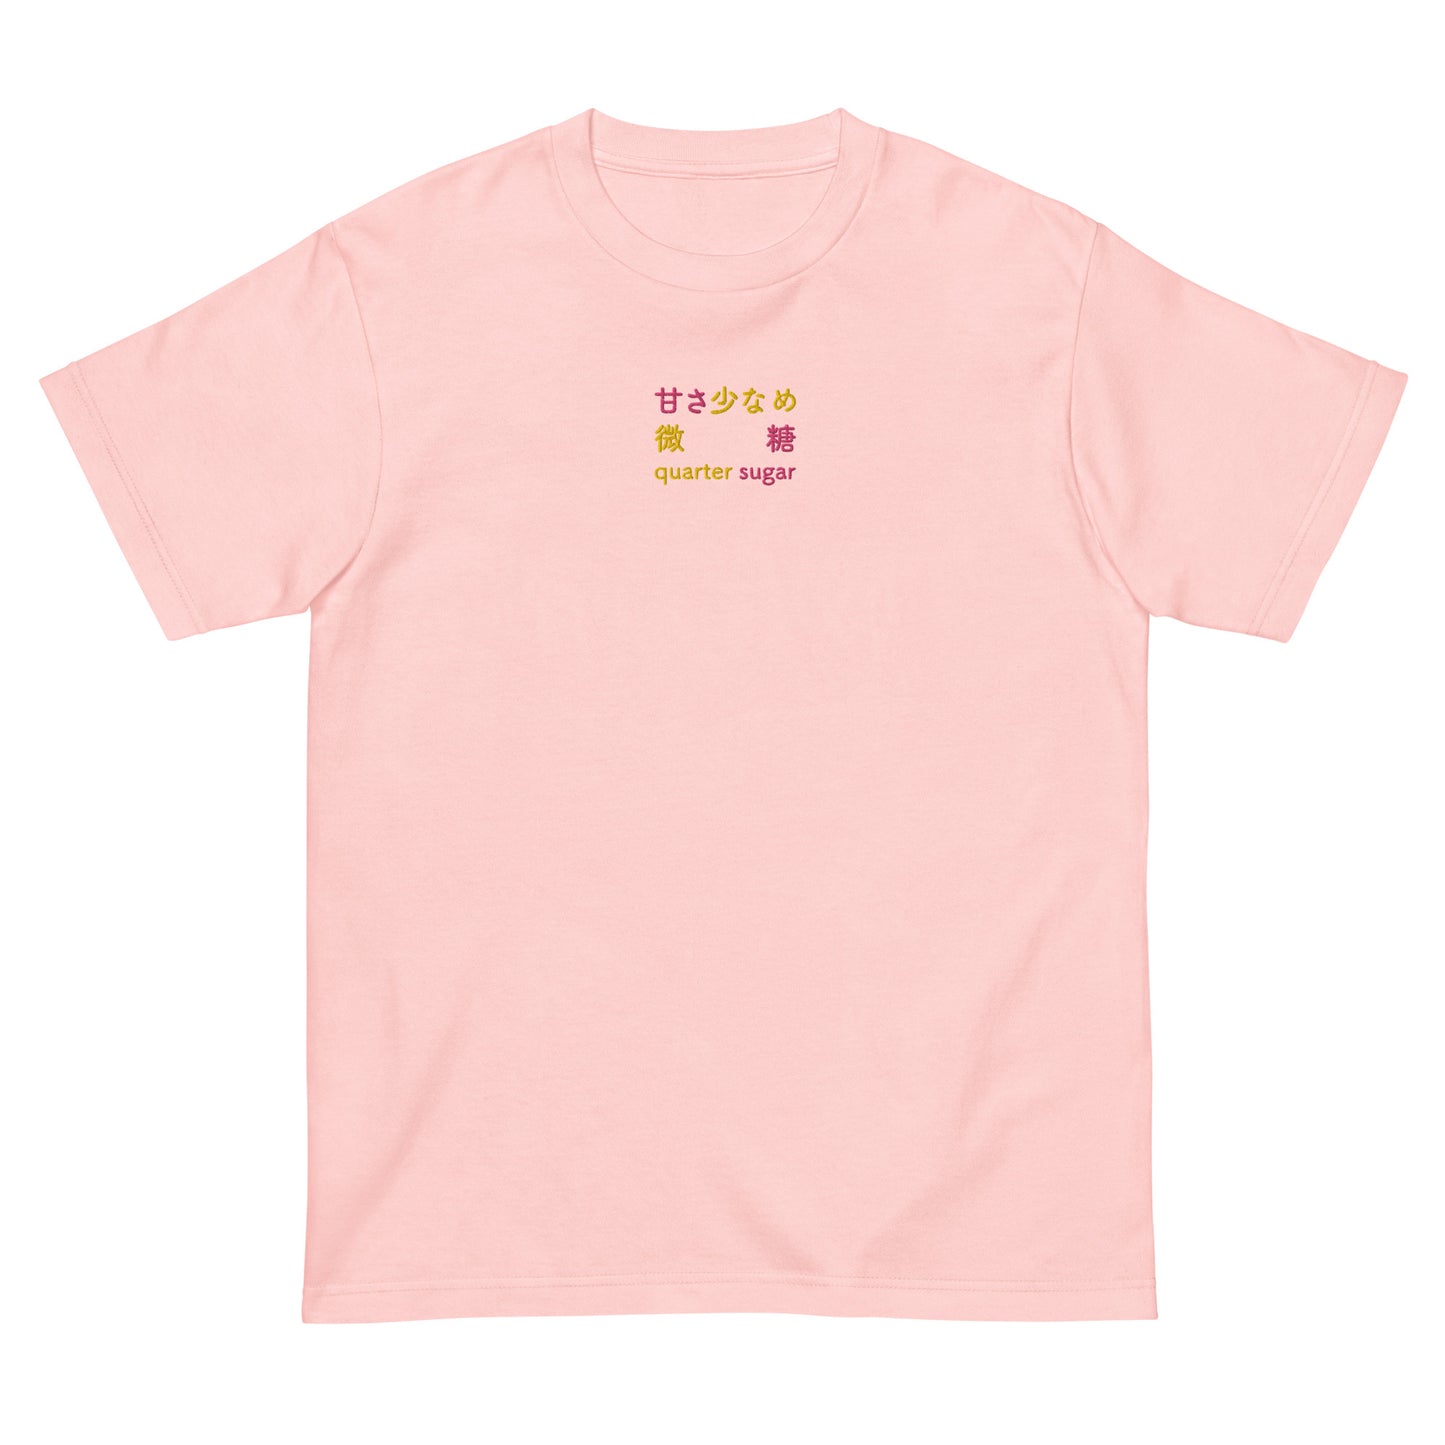 Pink High Quality Tee - Front Design with an Yellow, Pink Embroidery "Quarter Sugar" in Japanese,Chinese and English